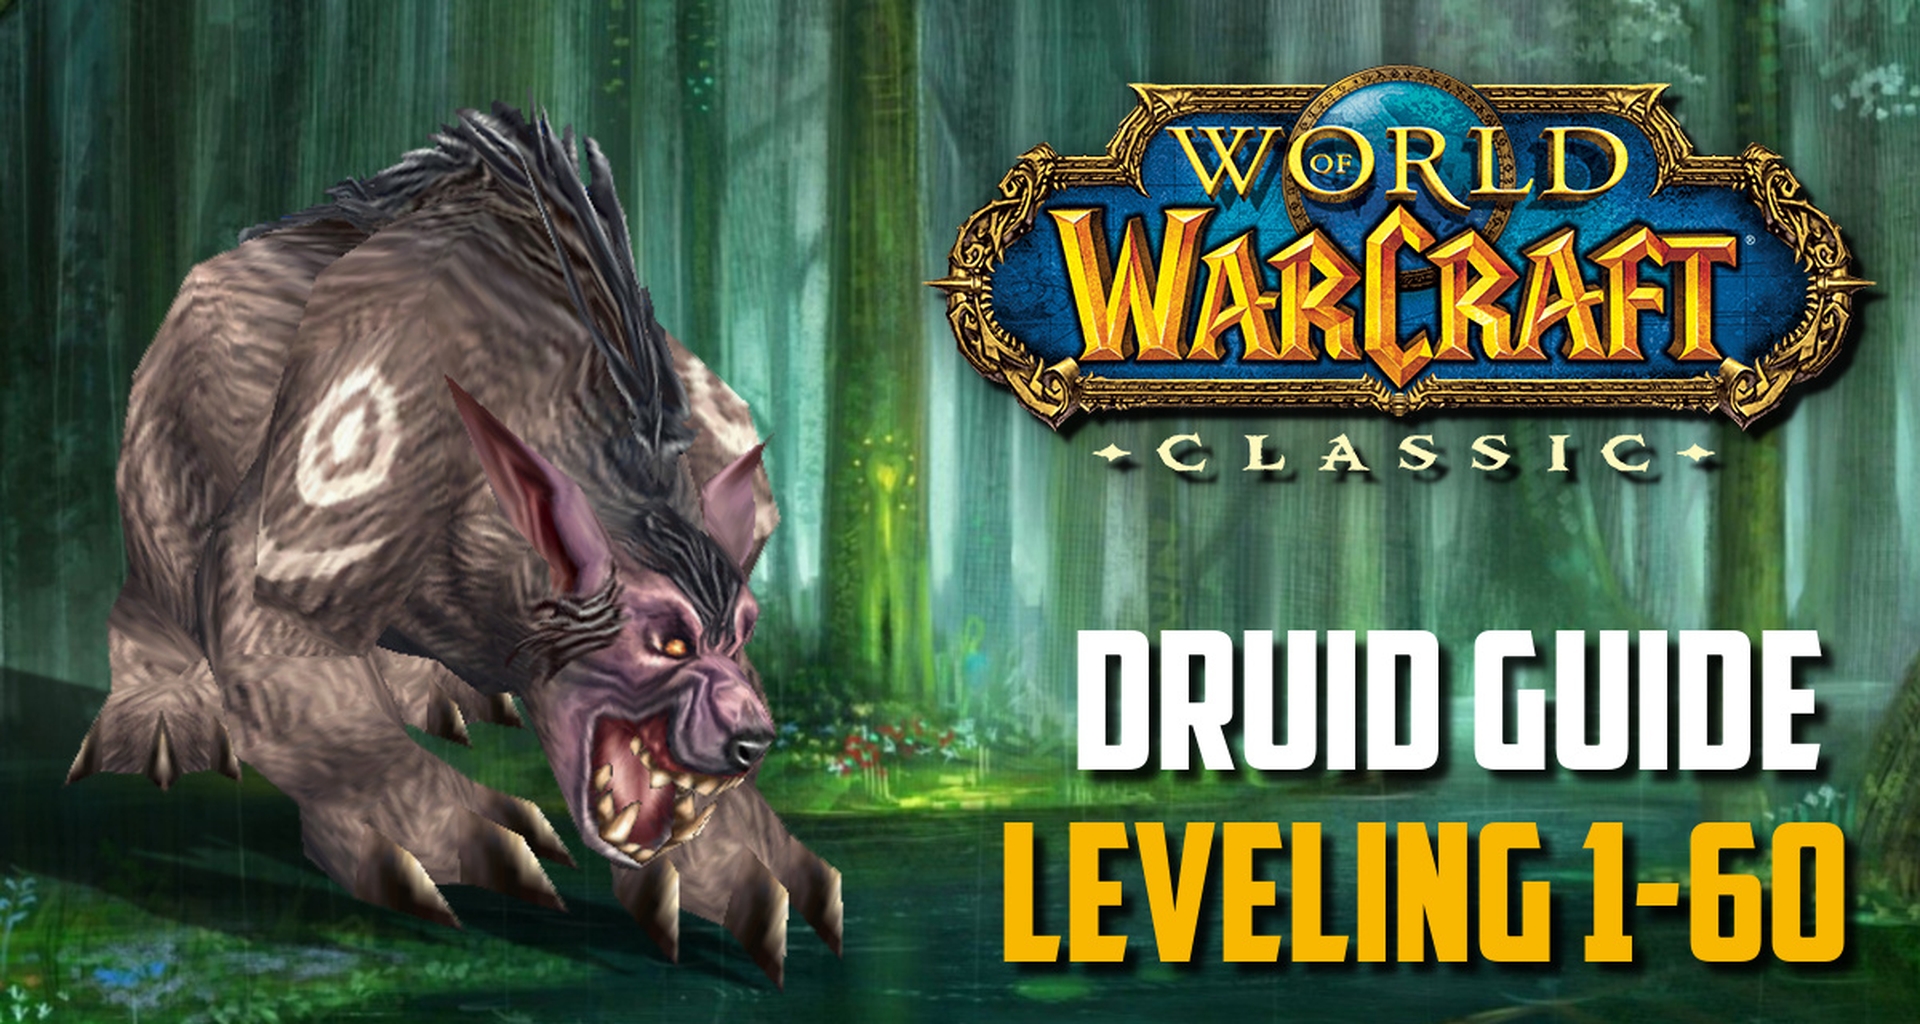 classic-wow-druid-leveling-guide-1-60-best-tips